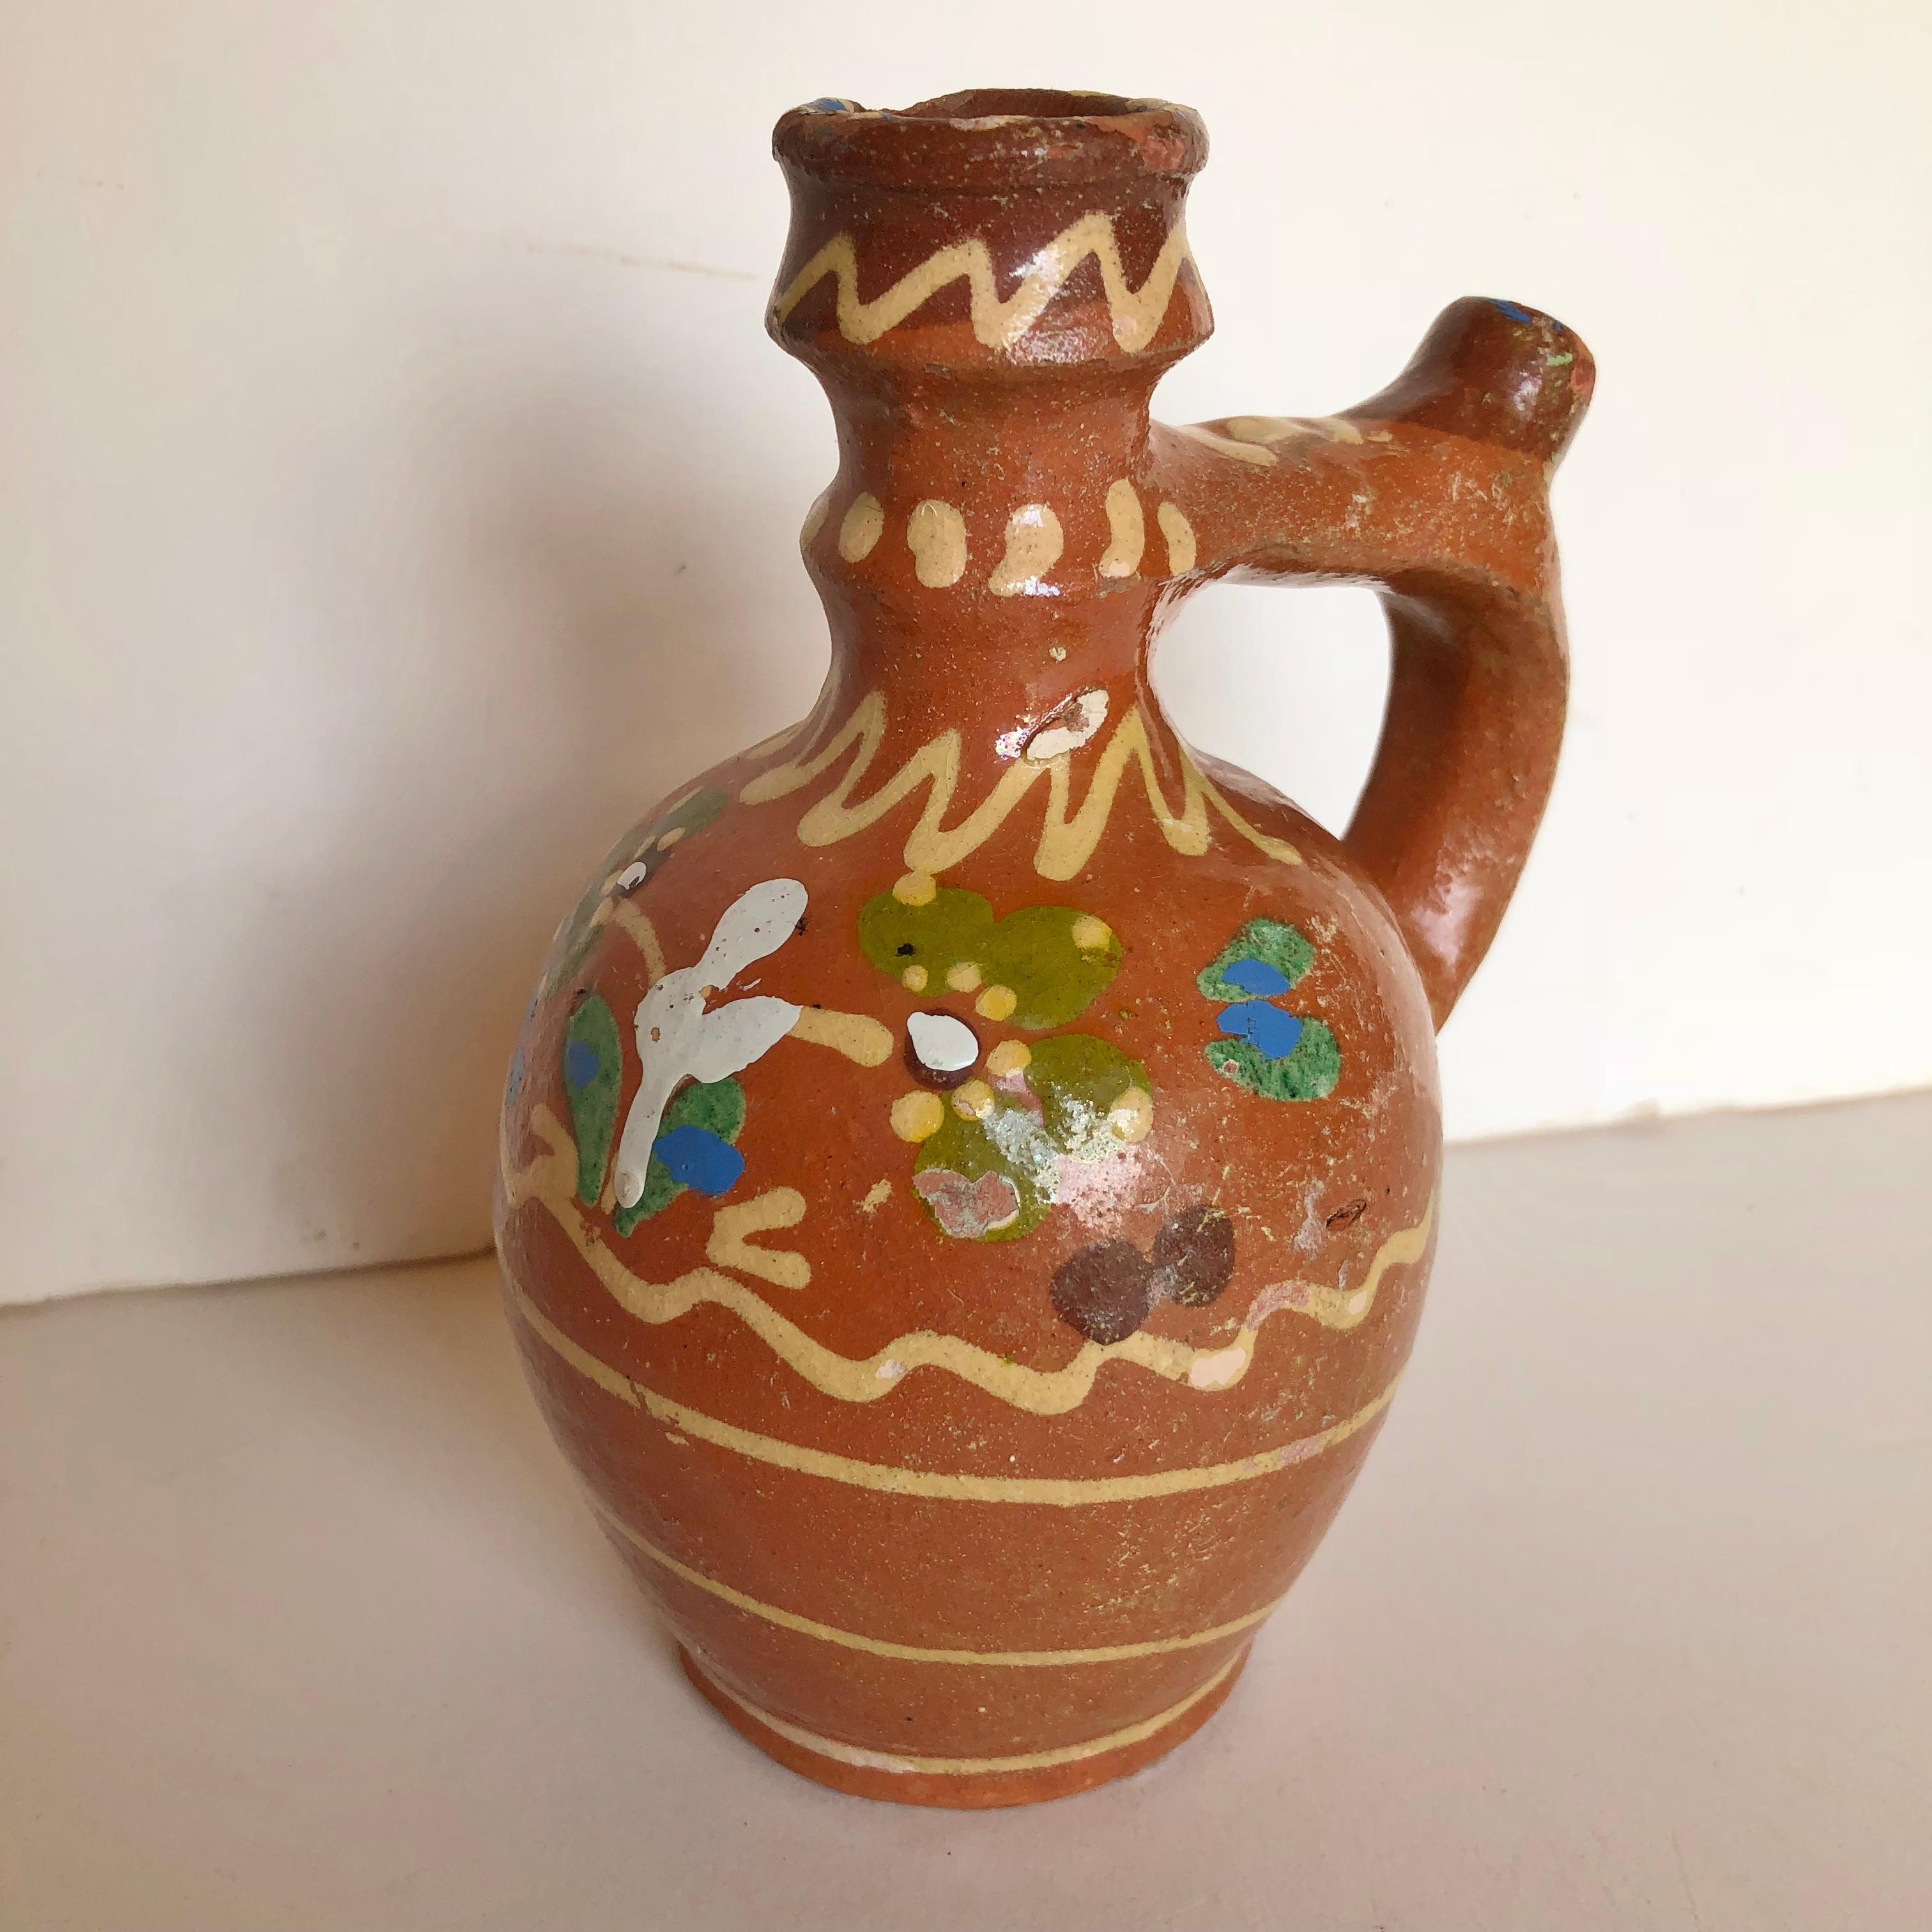 Three handmade pottery folk art carafes, jugs from Transylvania, Serbia.  They have a platter painted glaze and were used for water or wine. There are minor chips and paint loss but are wonderful period pieces of folk art. The larger one is 8